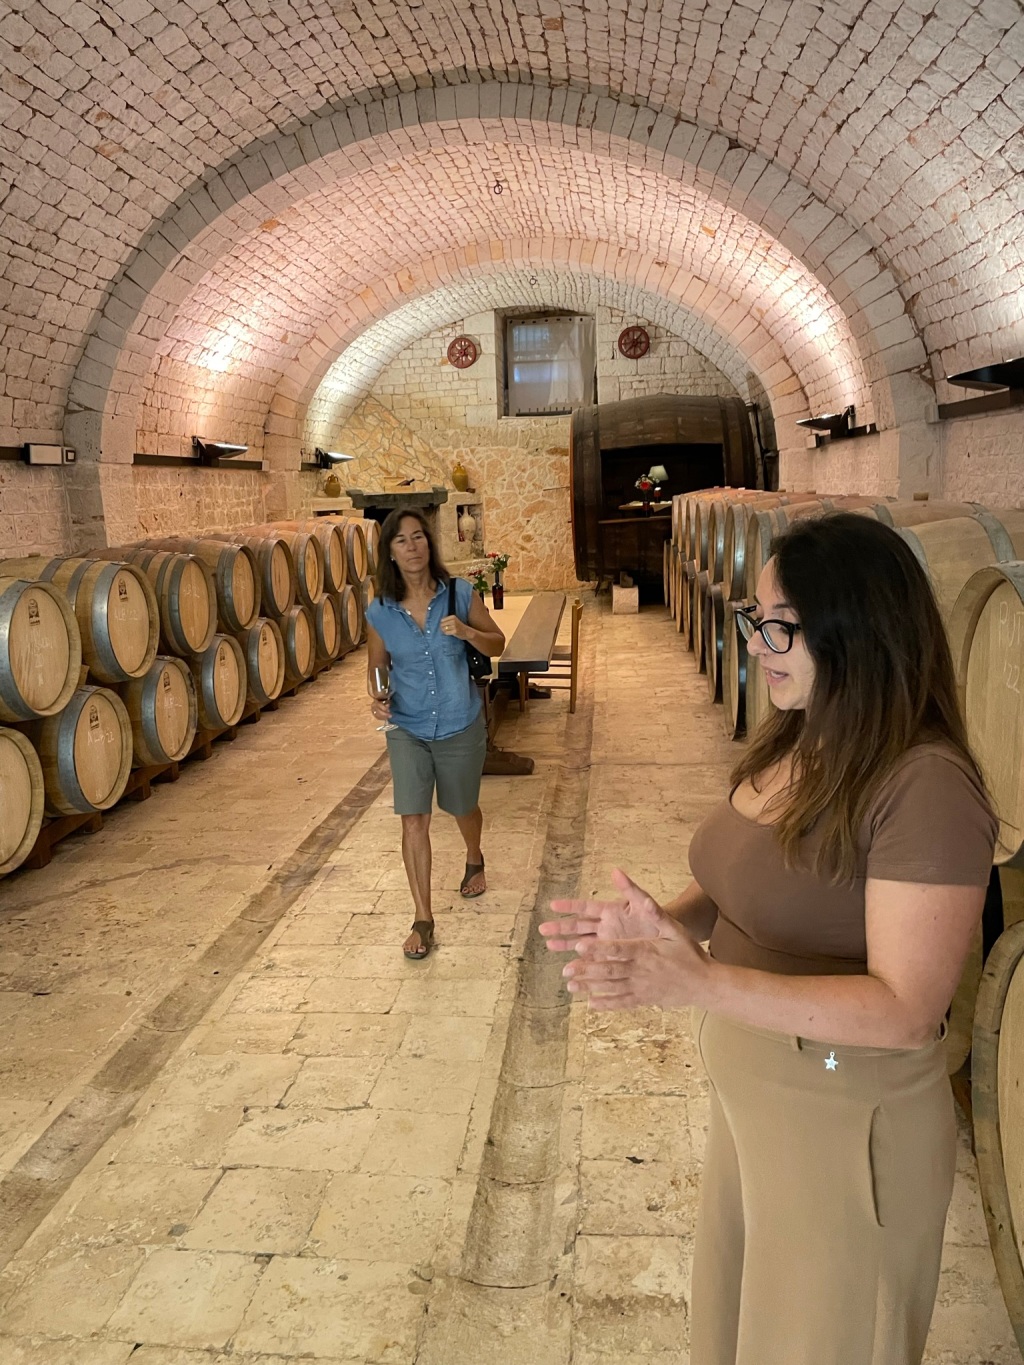 19: Visits to Wineries in Europe